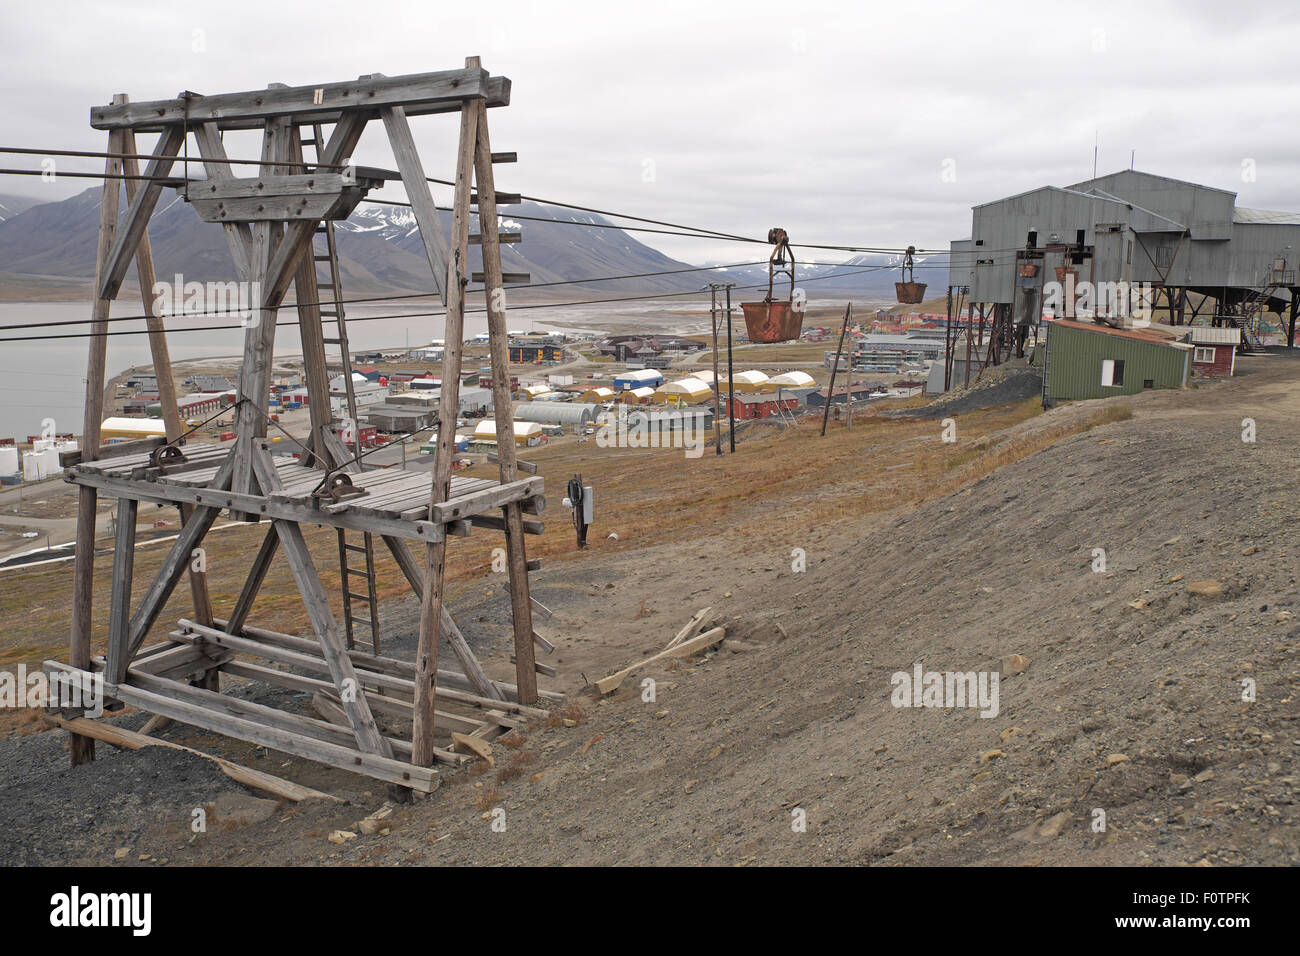 Part of the town of Longyearbyen seen from the disused aerial tramway centre building, Spitzbergen, Svalbard. Stock Photo